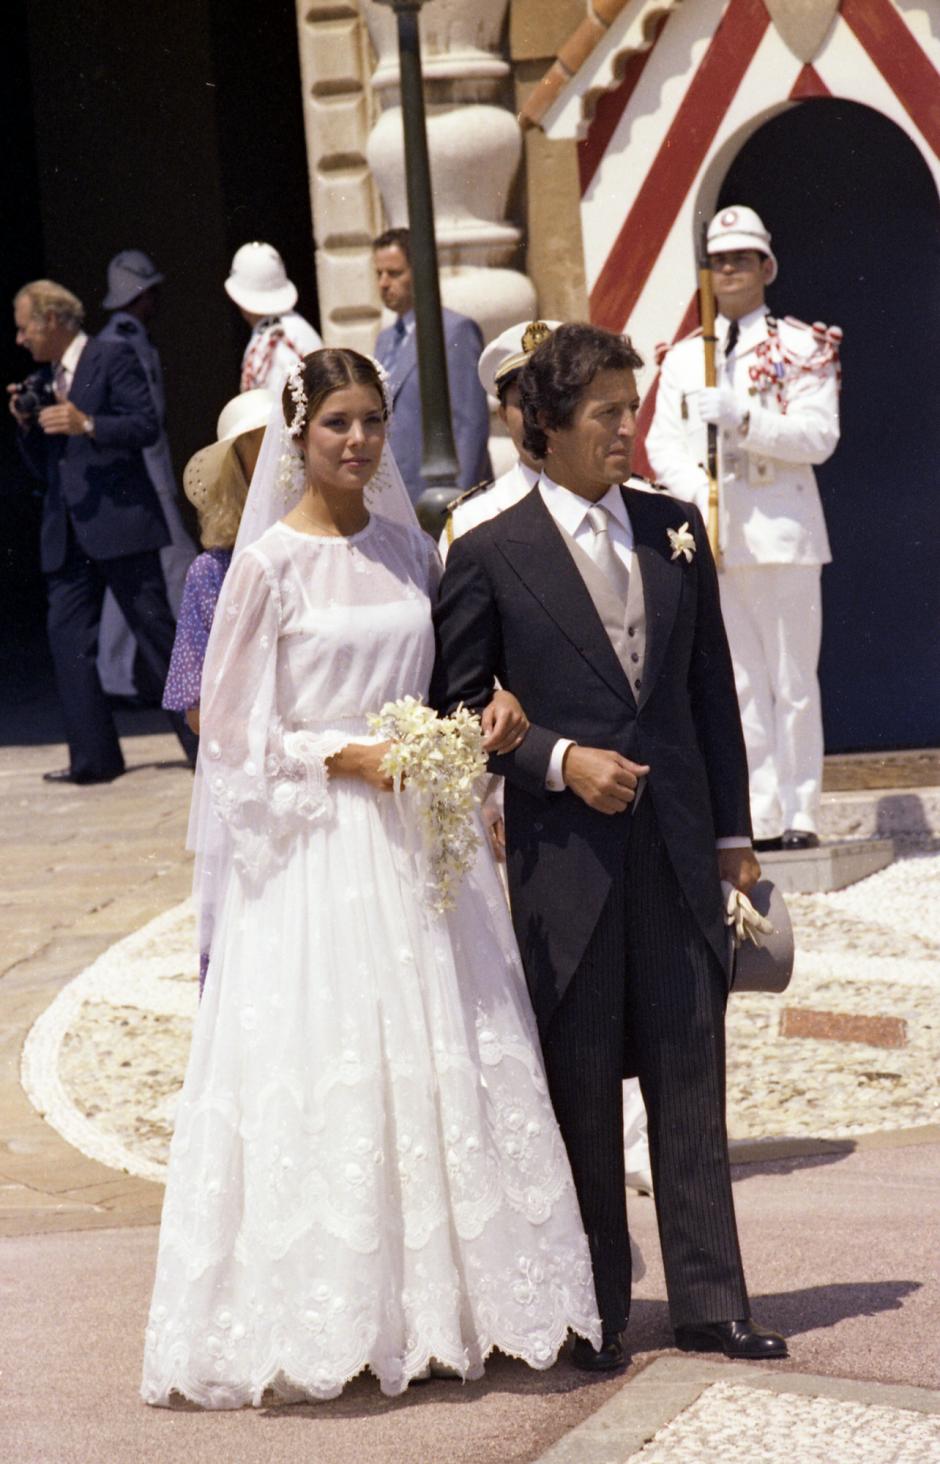 Princess Caroline of Monaco stands with her husband Philippe Junot at the entrance of the Monaco Palace after their church wedding in Monaco, June 29, 1978.